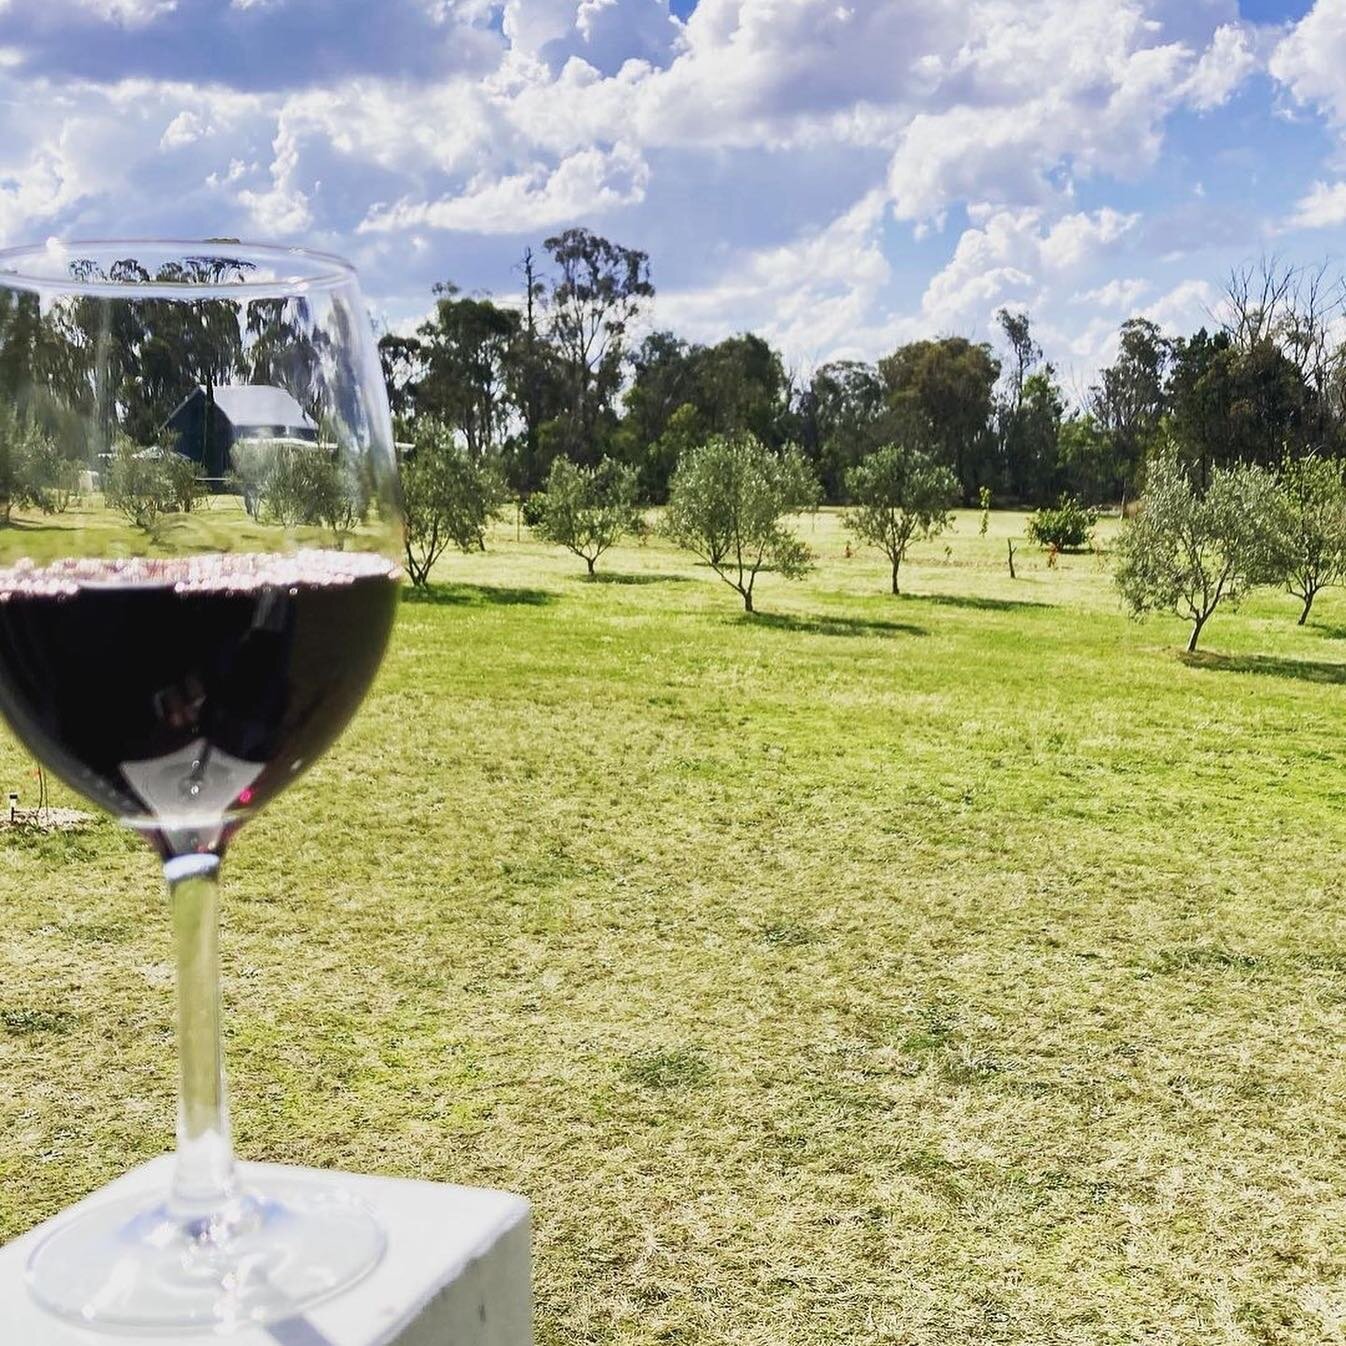 Repost &bull; @johns.cottage Stanthorpe = the best wine 🍇🍷Lovely day exploring the wineries and finding our favourite Merlot @tobinwines I&rsquo;ll bring you one home to try @nickydruery 🍾🍷🤗

#winetour #winecountry #merlot #granitebelt #holiday